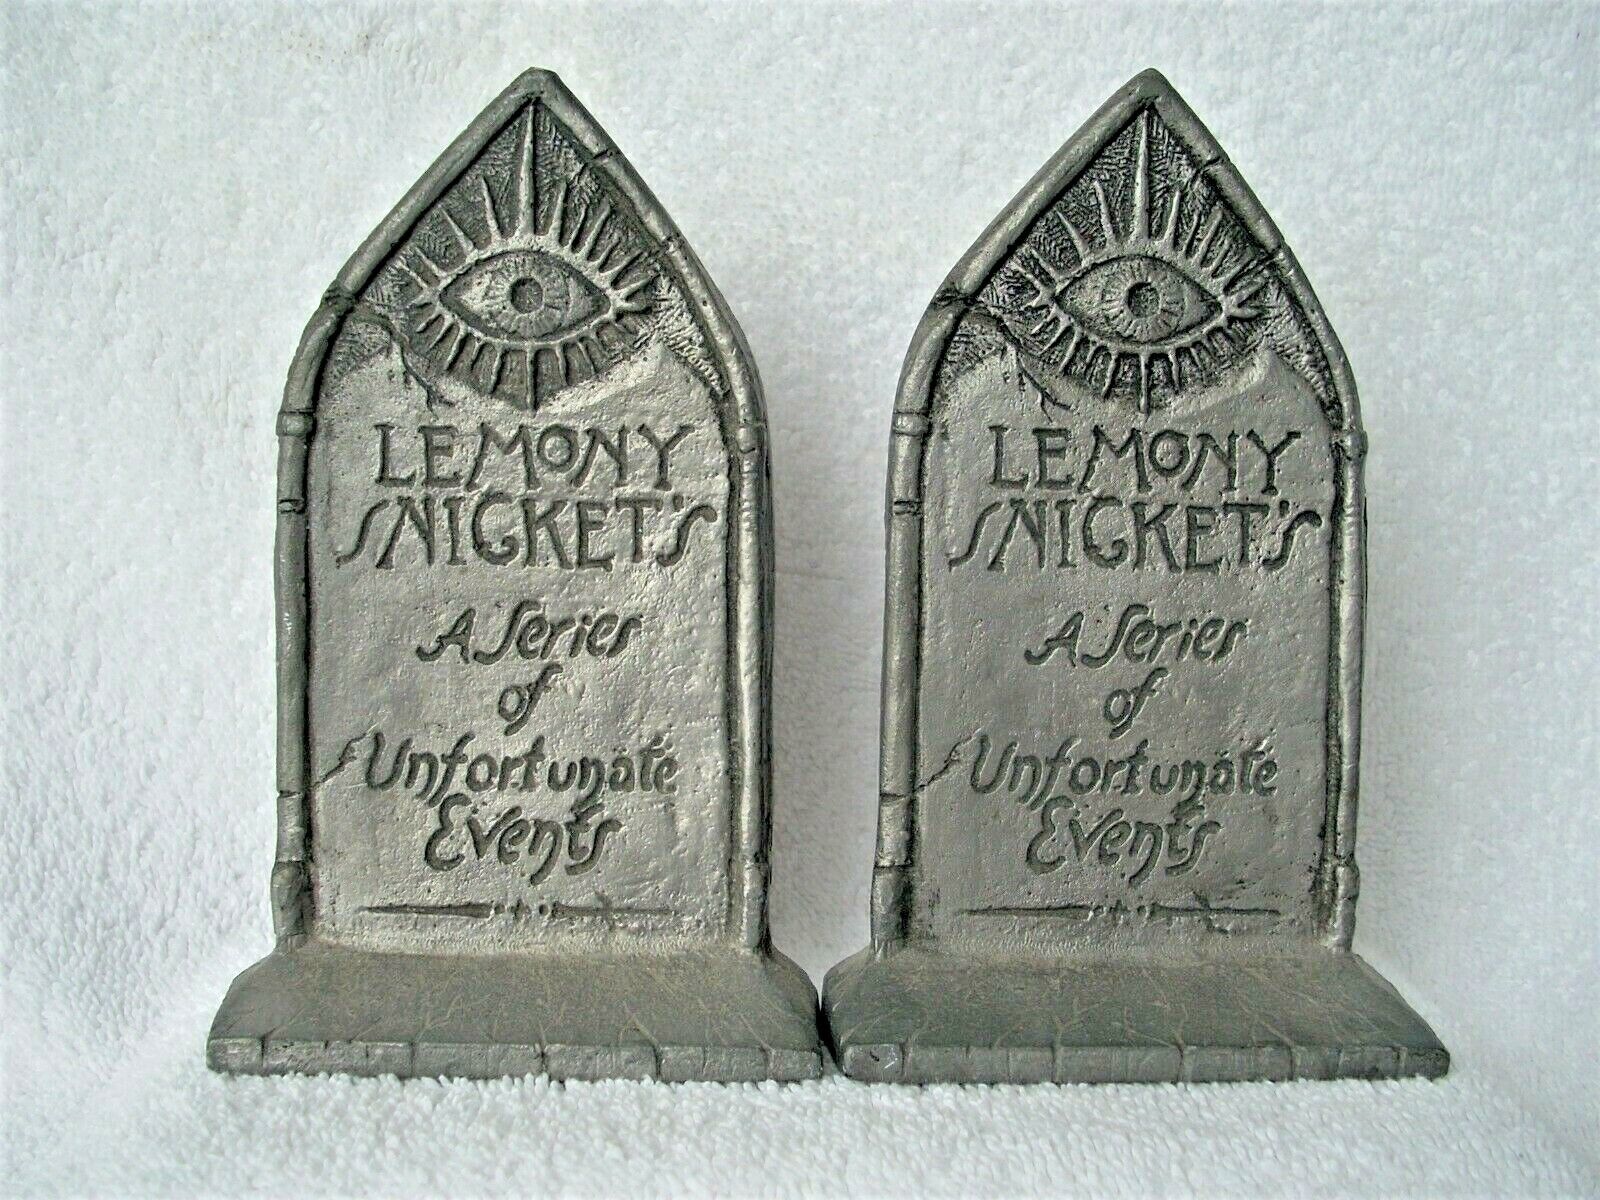 LEMONY SNICKET'S "A SERIES OF UNFORTUNATE EVENTS" Metal Bookends (2004) Unknown